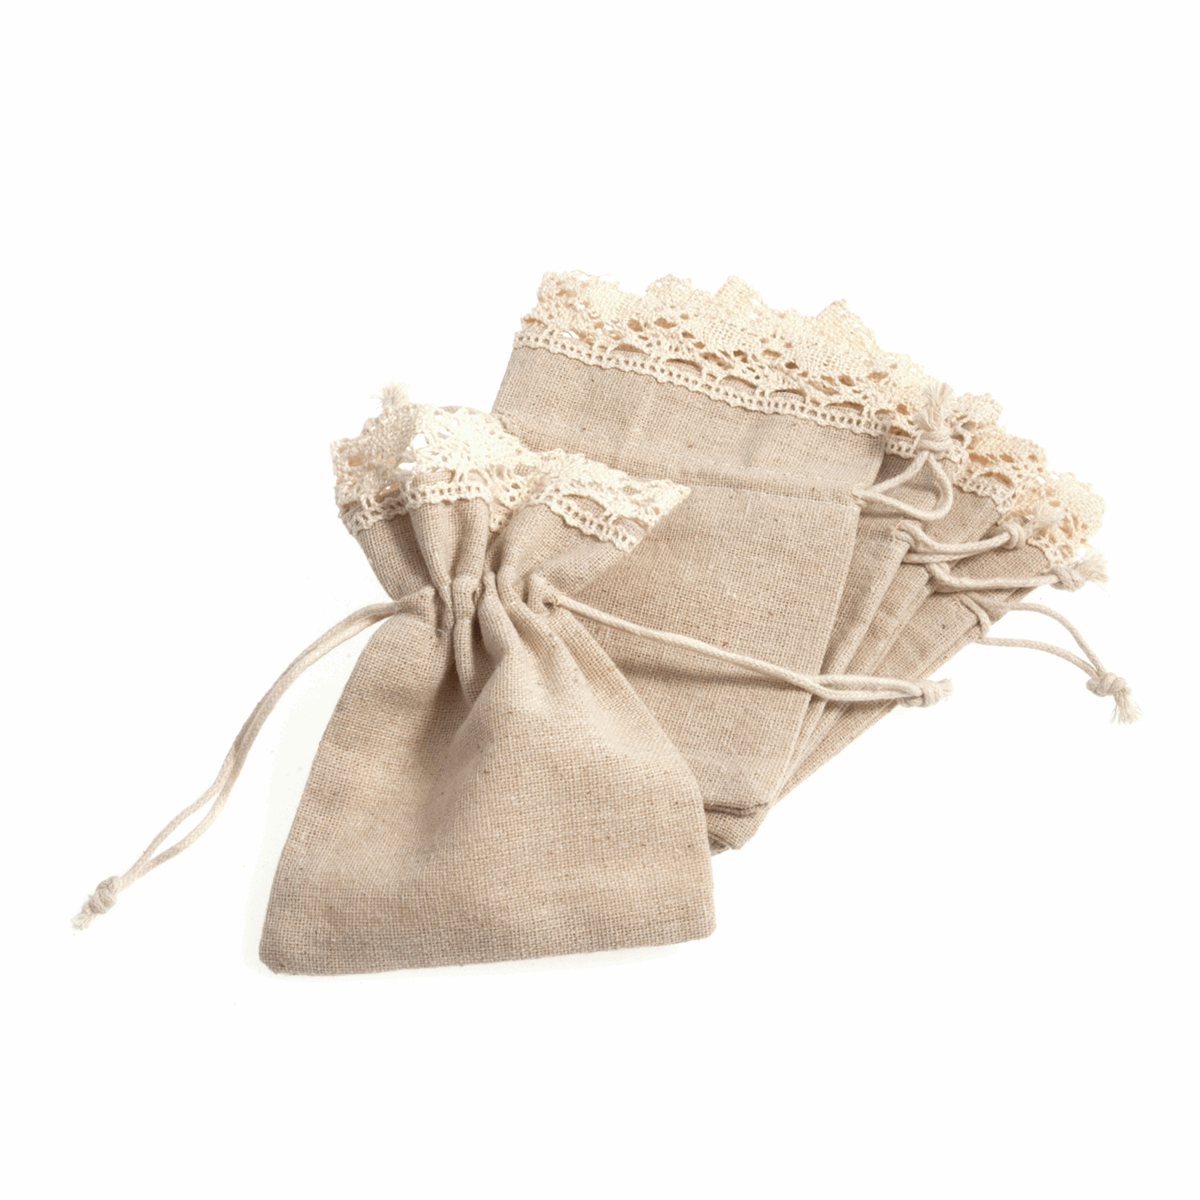 Cotton Wedding Favour Bag with Crochet Trim - Ivory (Pack of 5)